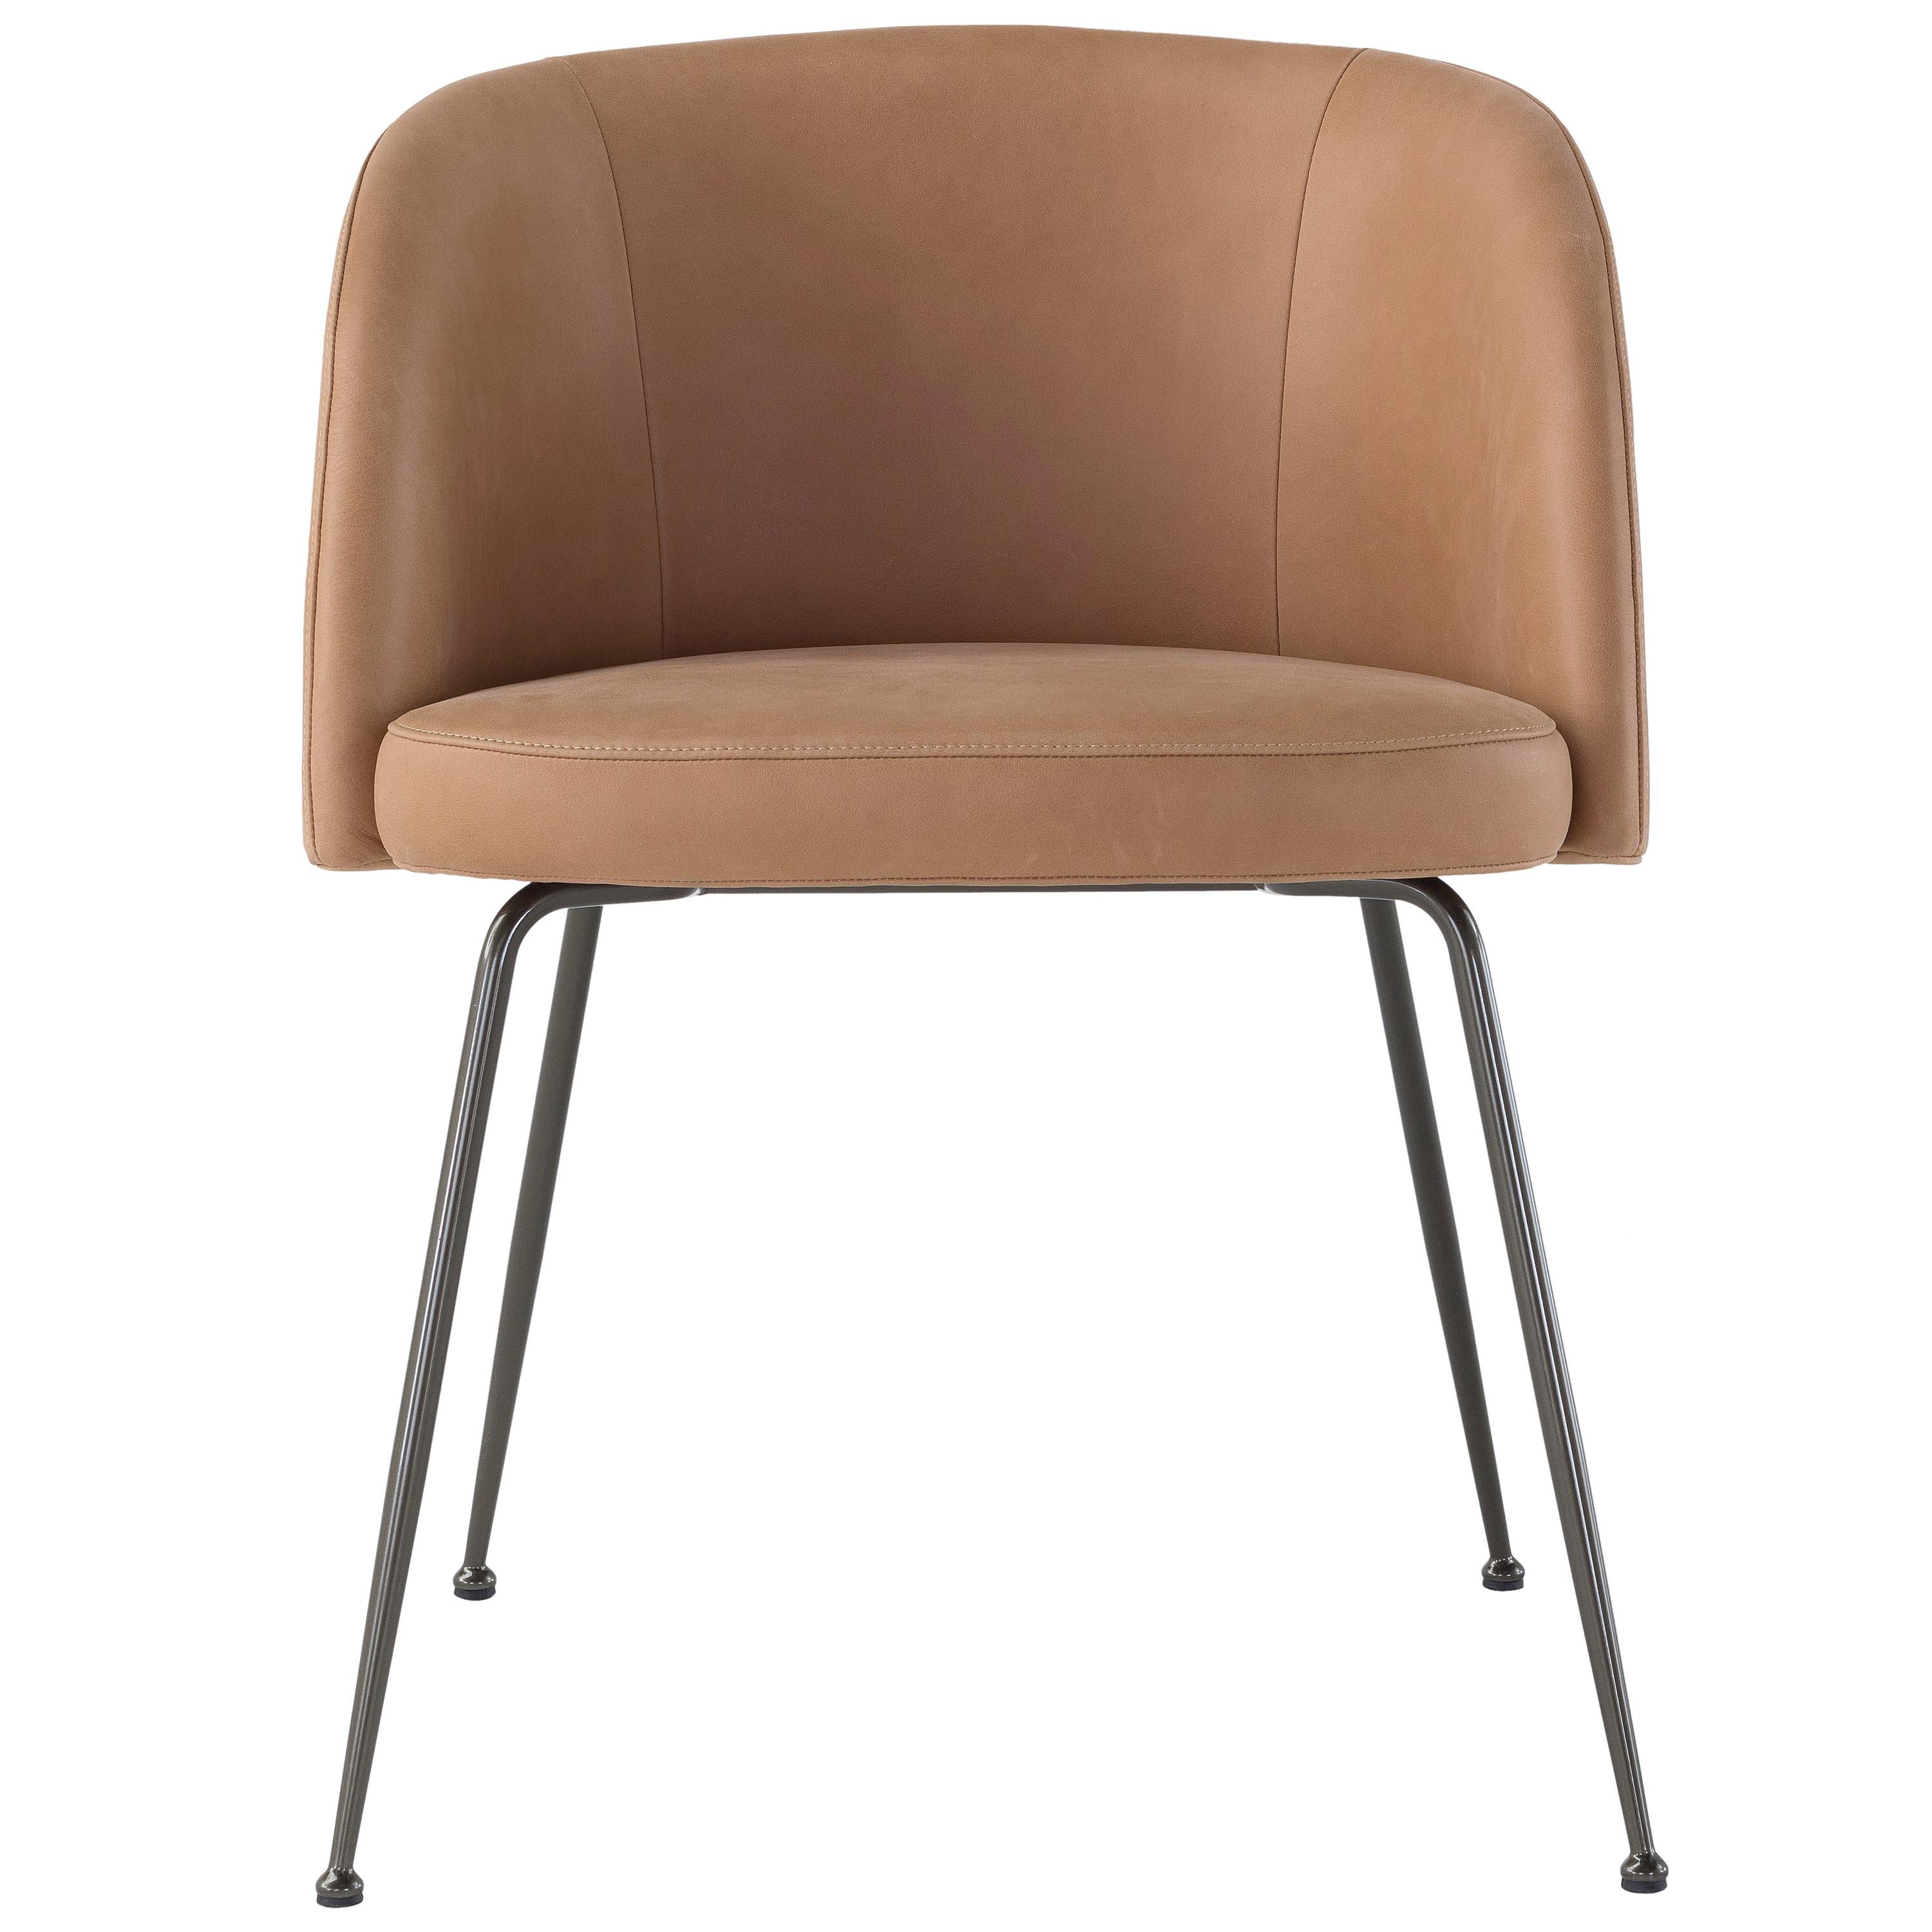 Amura Monnalisa Armchair in Leather and Gunmetal Base by Amuralab For Sale